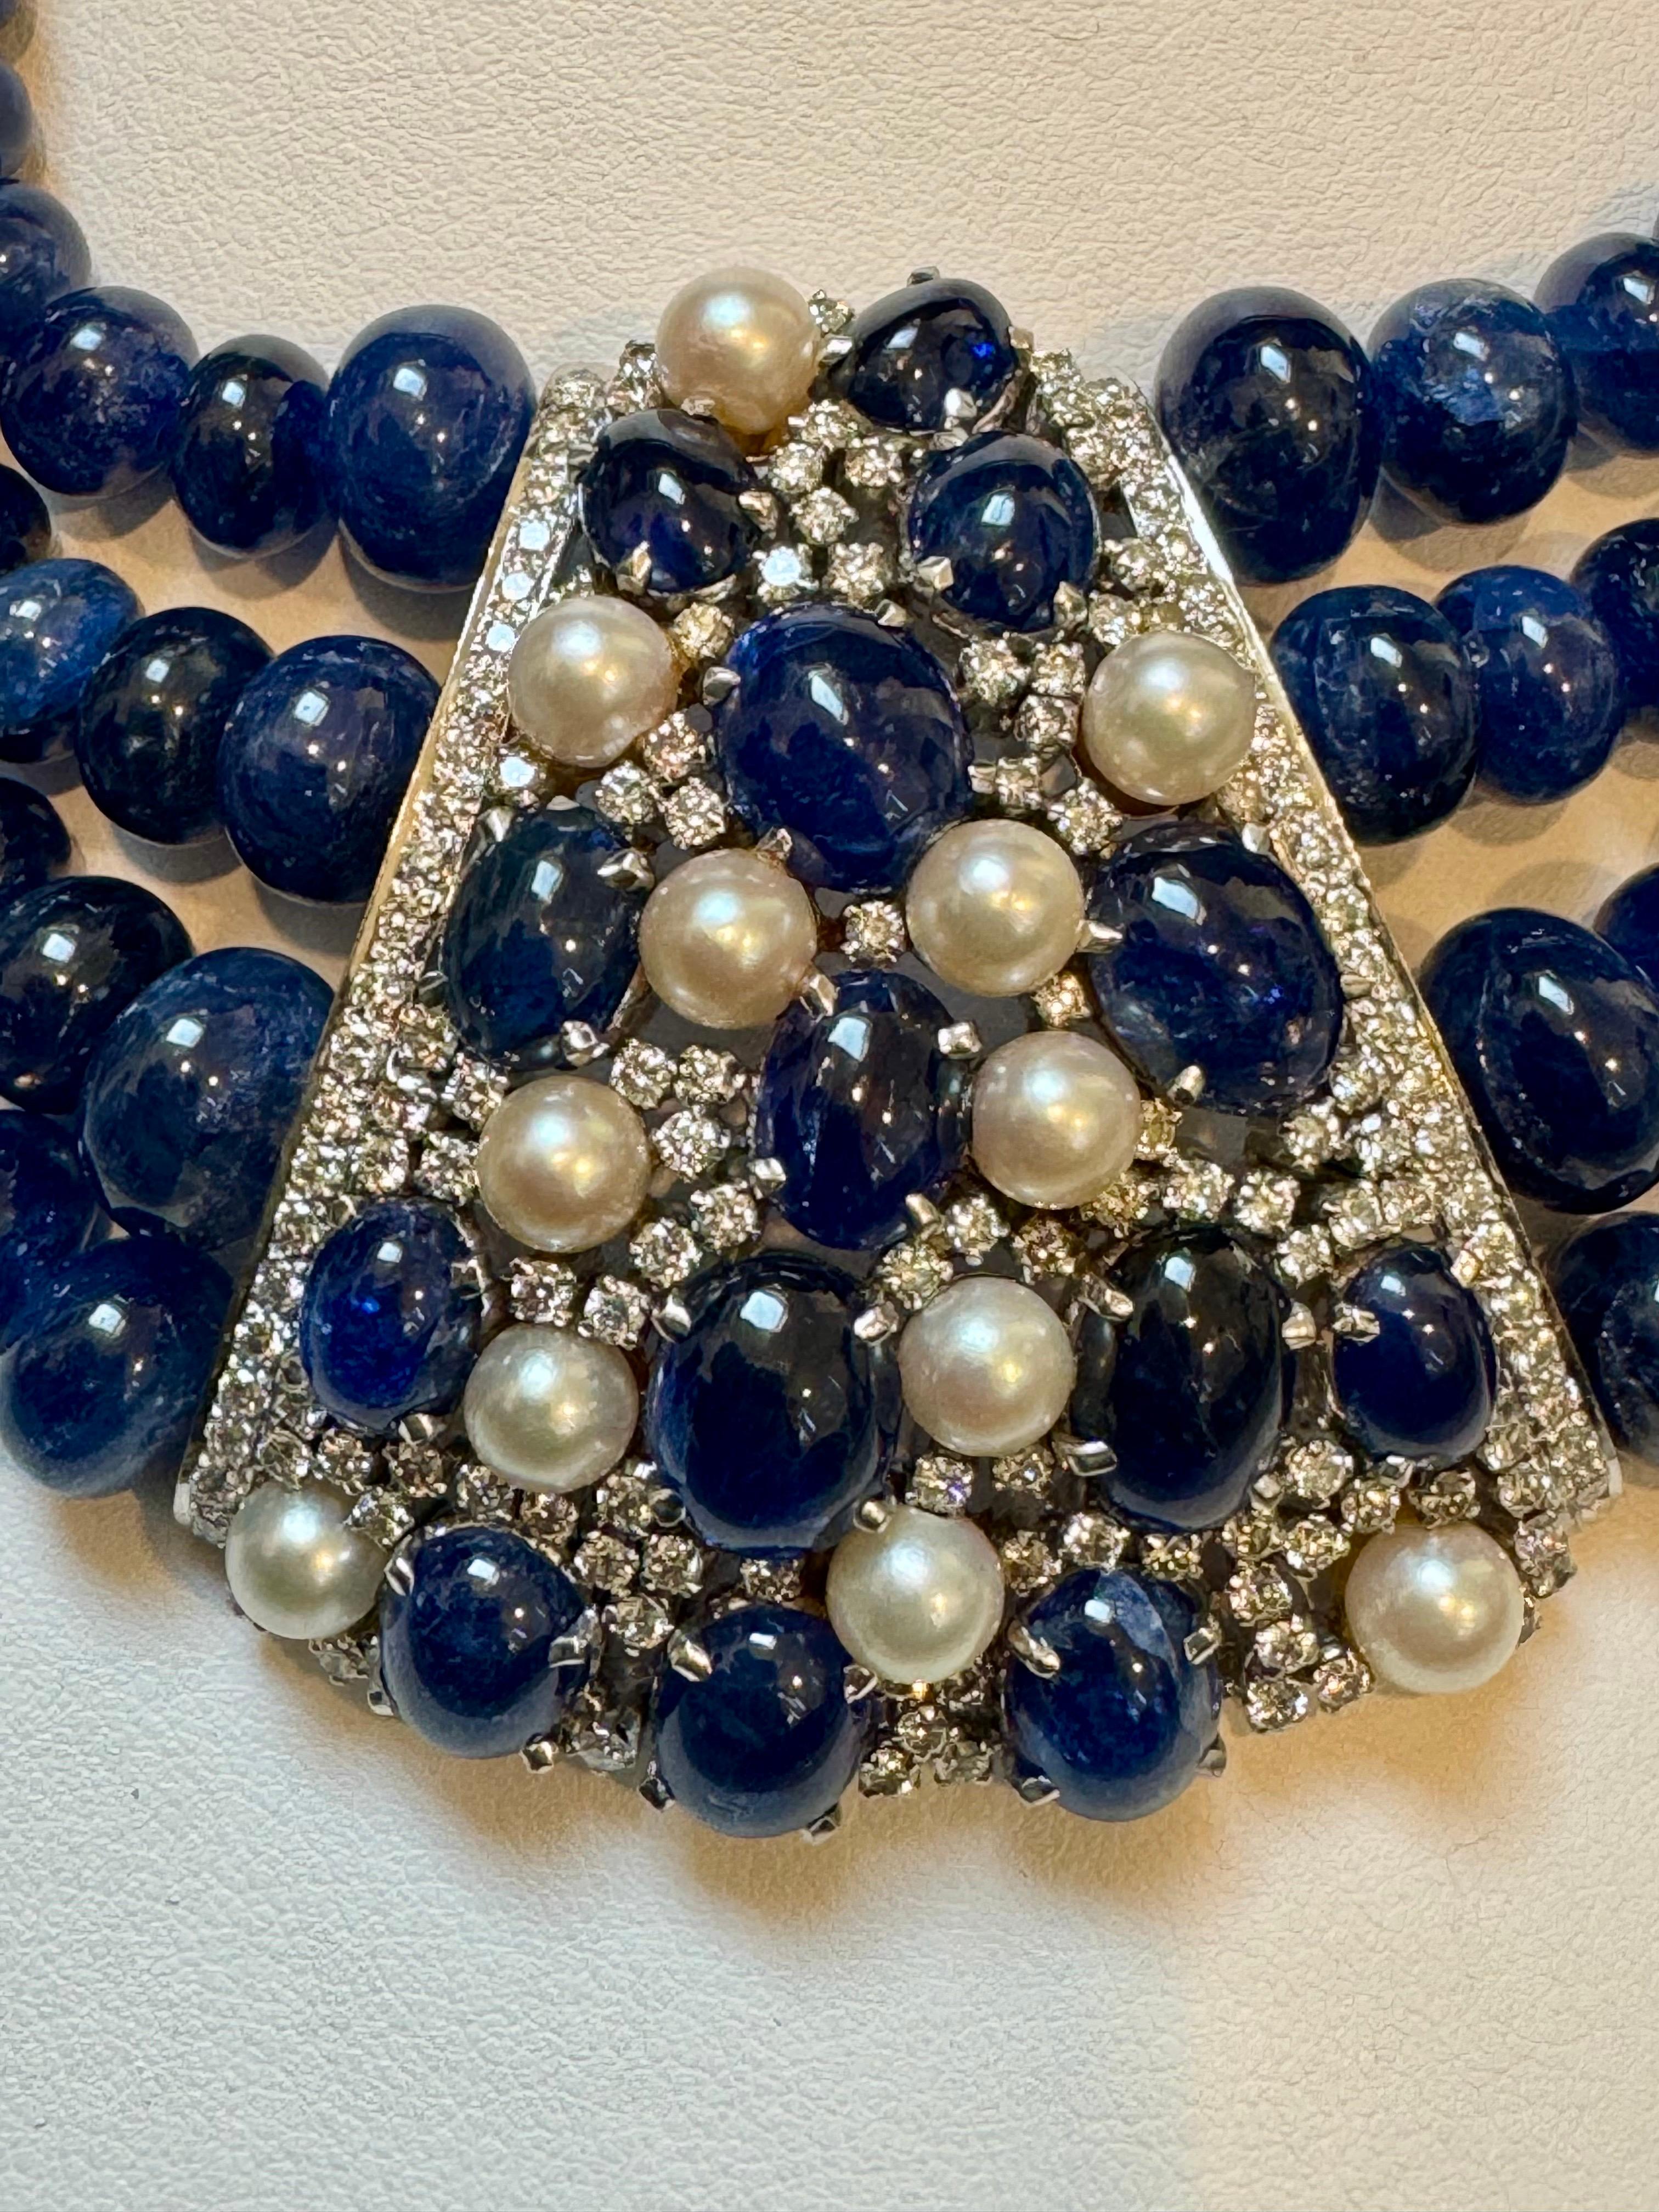 700Ct Sapphire Bead Necklace with cabochon & Diamond Center & Diamond Spacer 18K For Sale 10